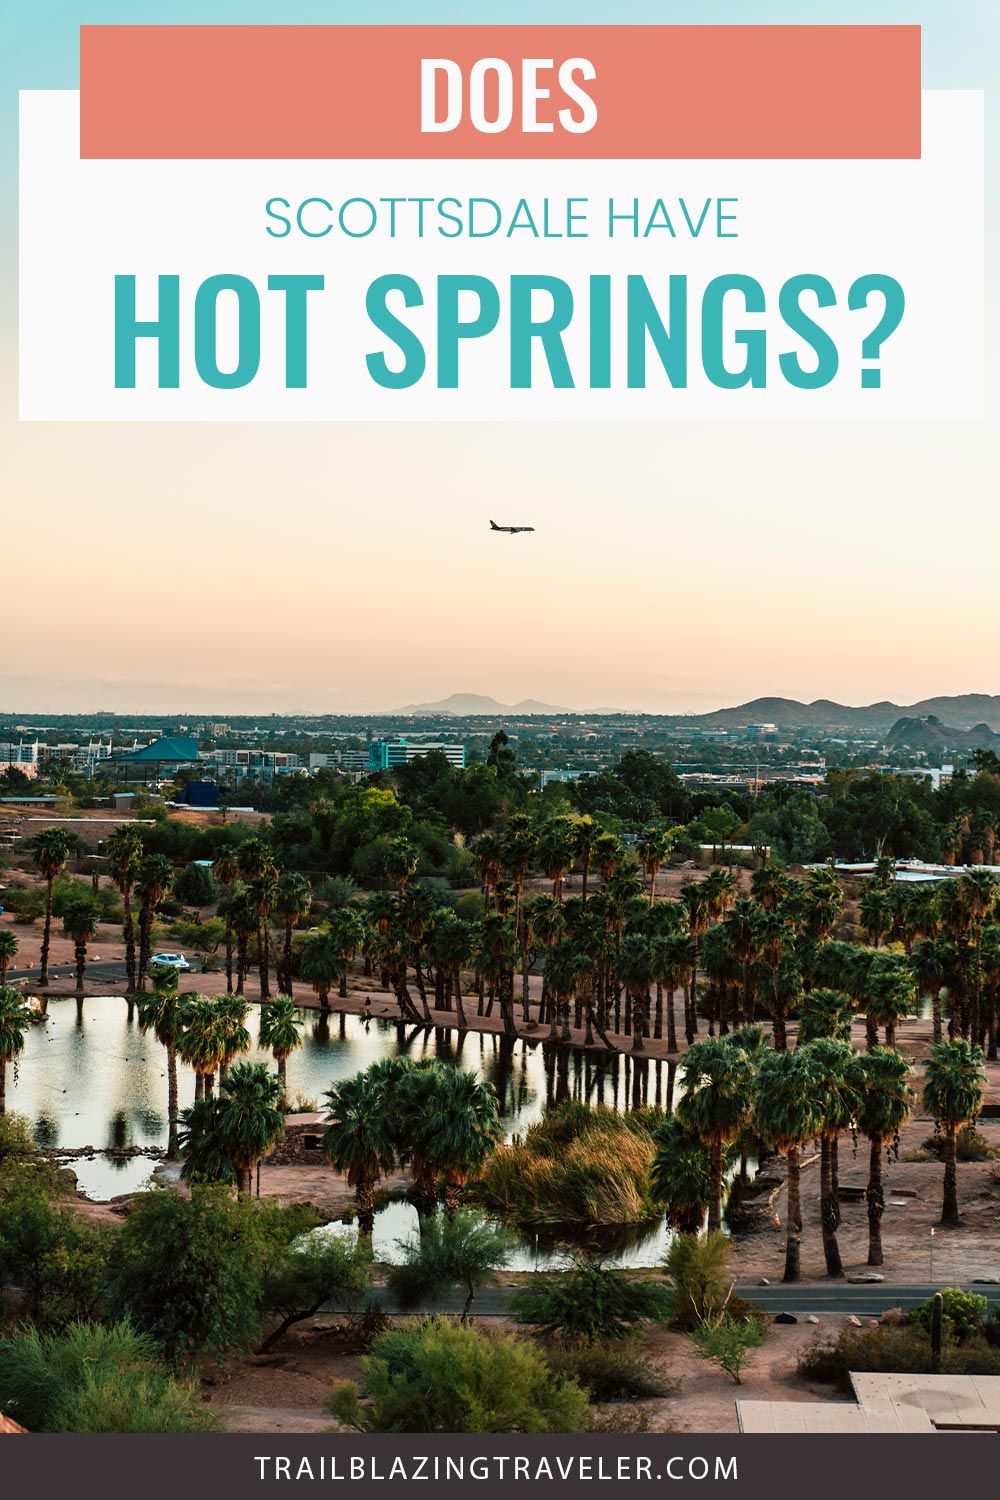 Does Scottsdale Have Hot Springs?